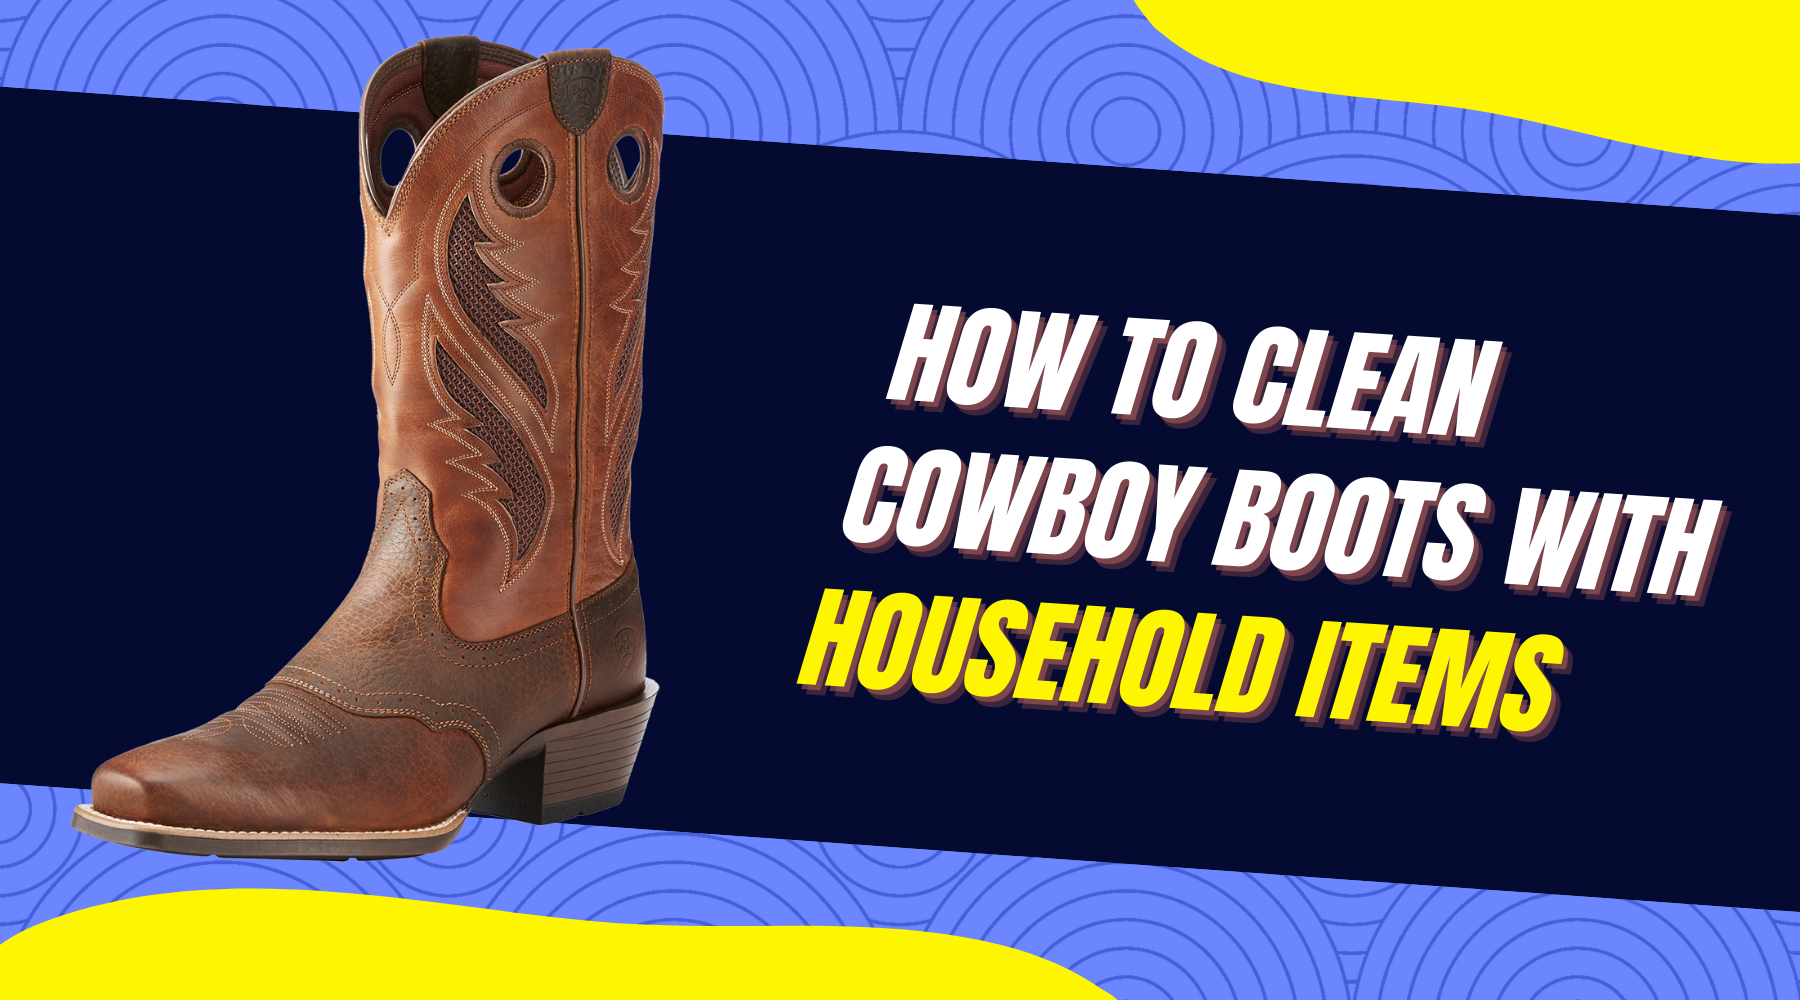 9 Methods to clean cowboy boots with household items